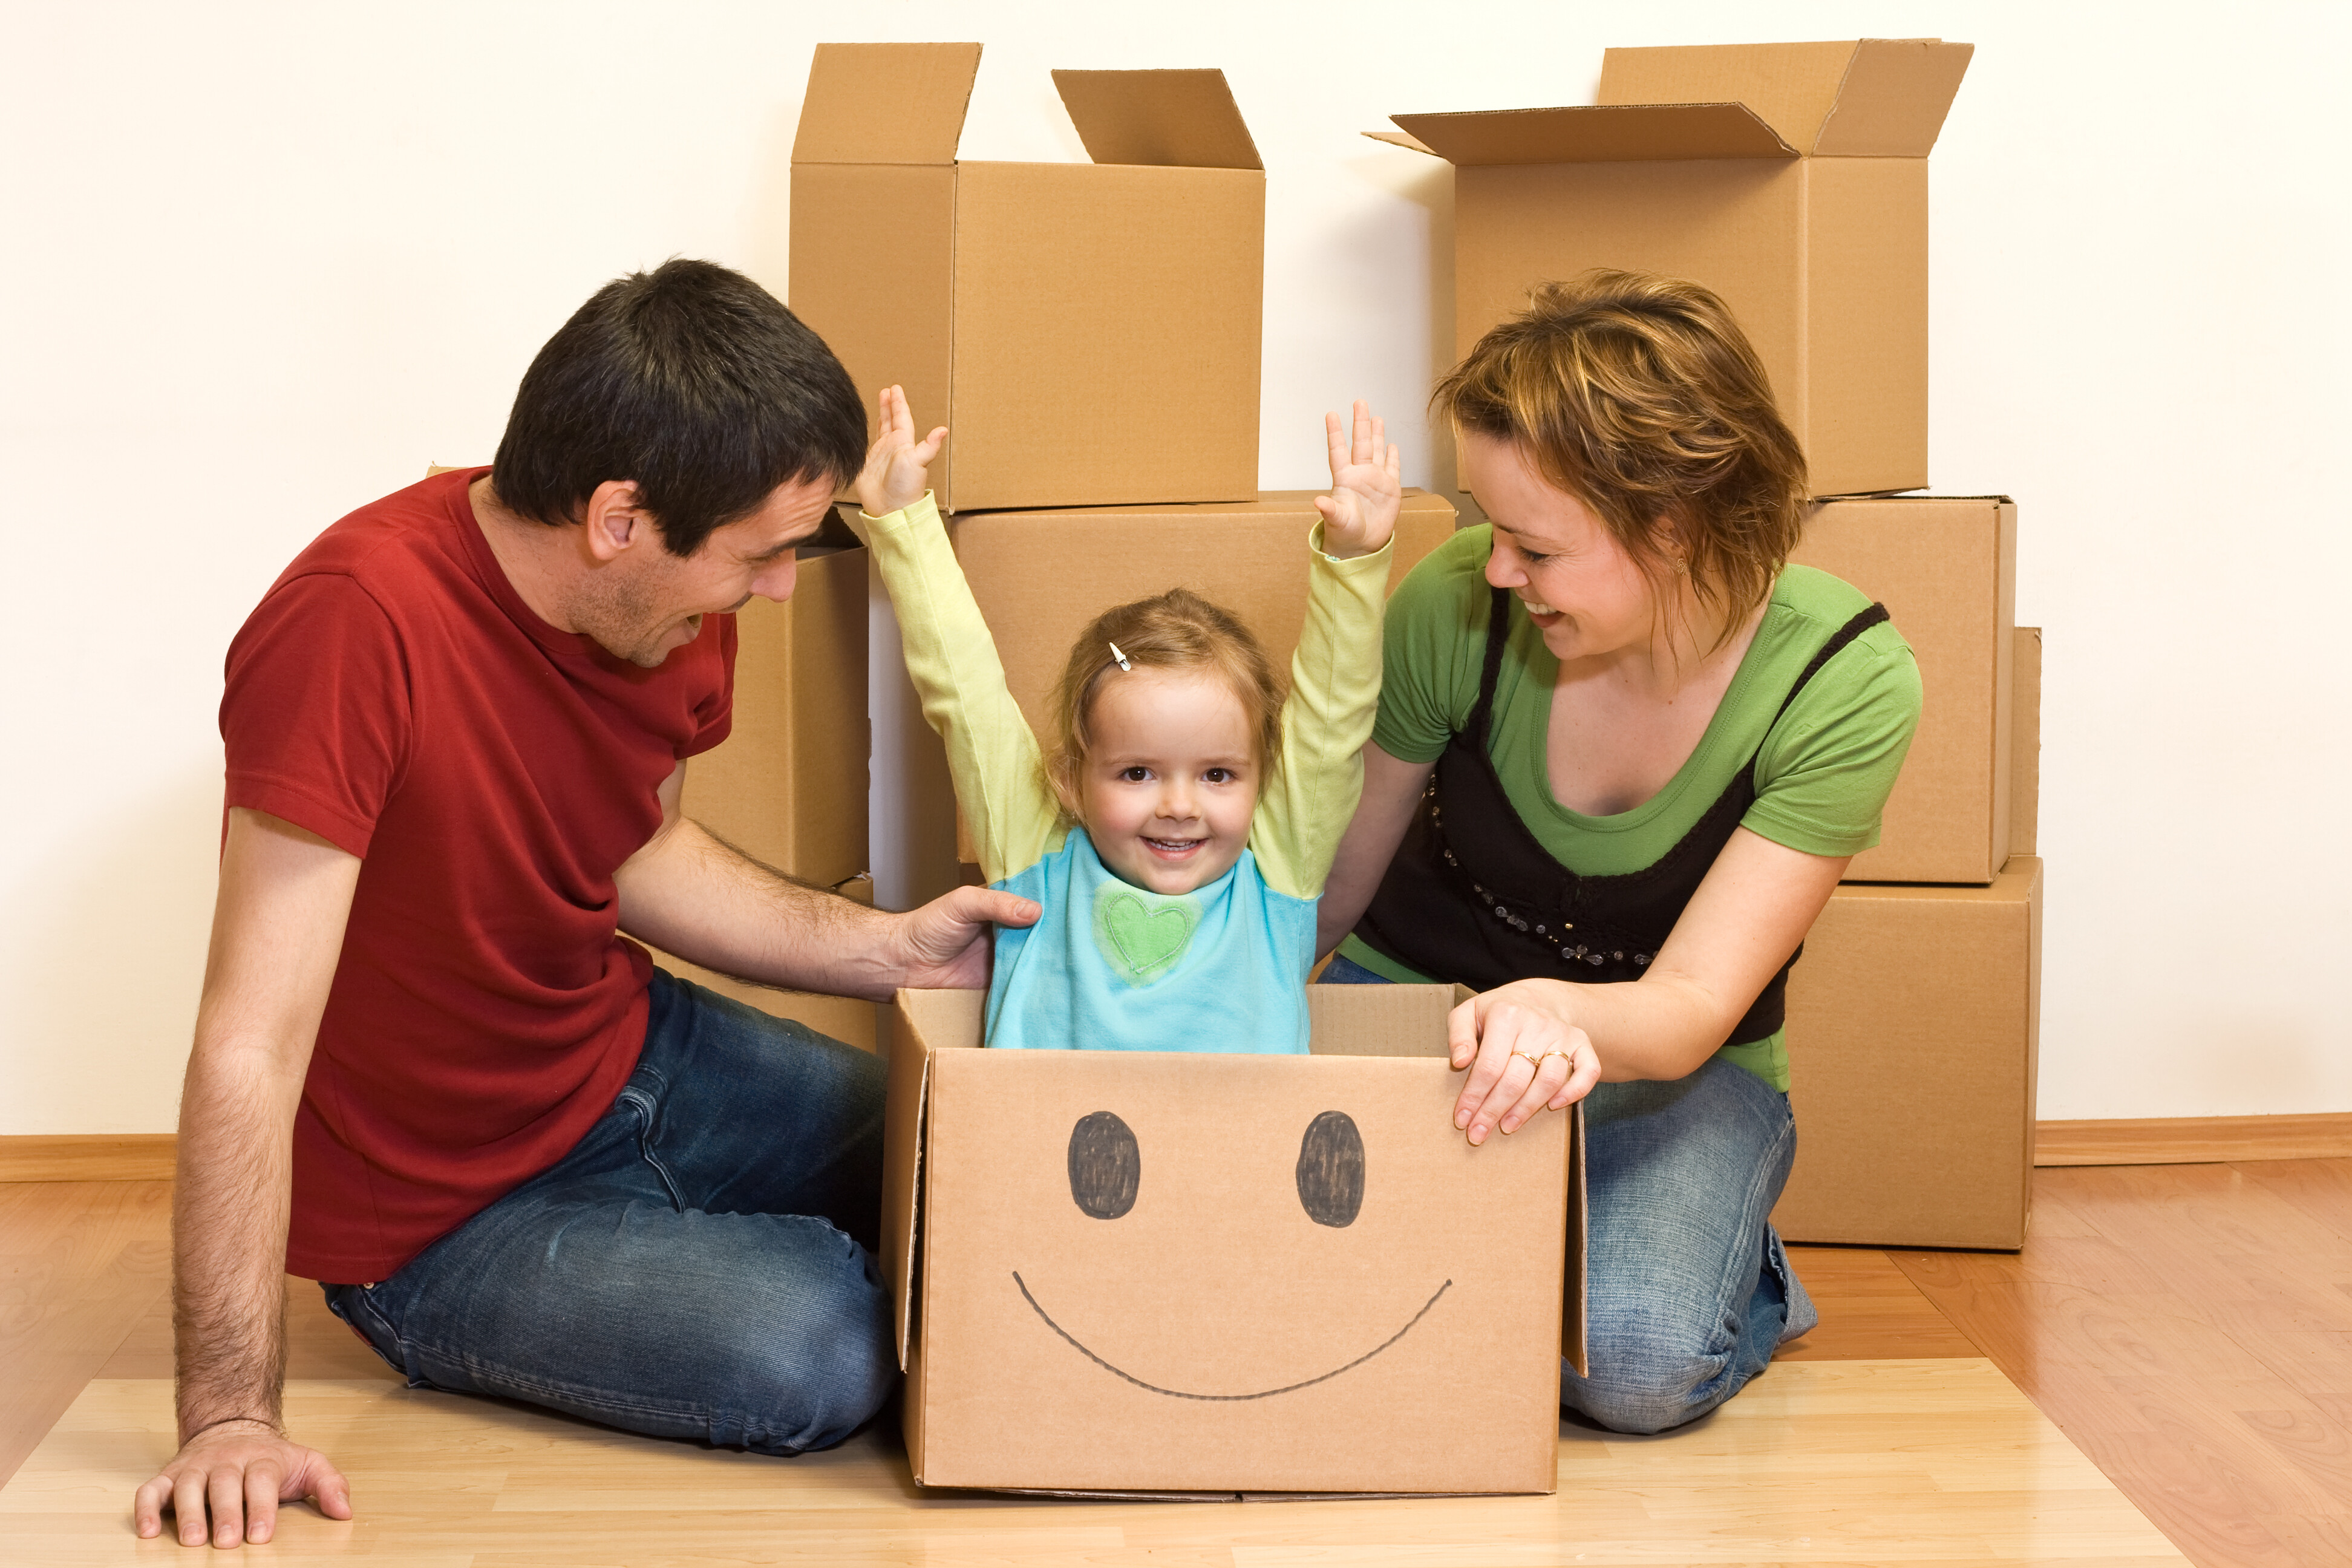 Woman and man with happy small child sitting in a moving box. Box has a smiley face on it and child has arms raised in the air.